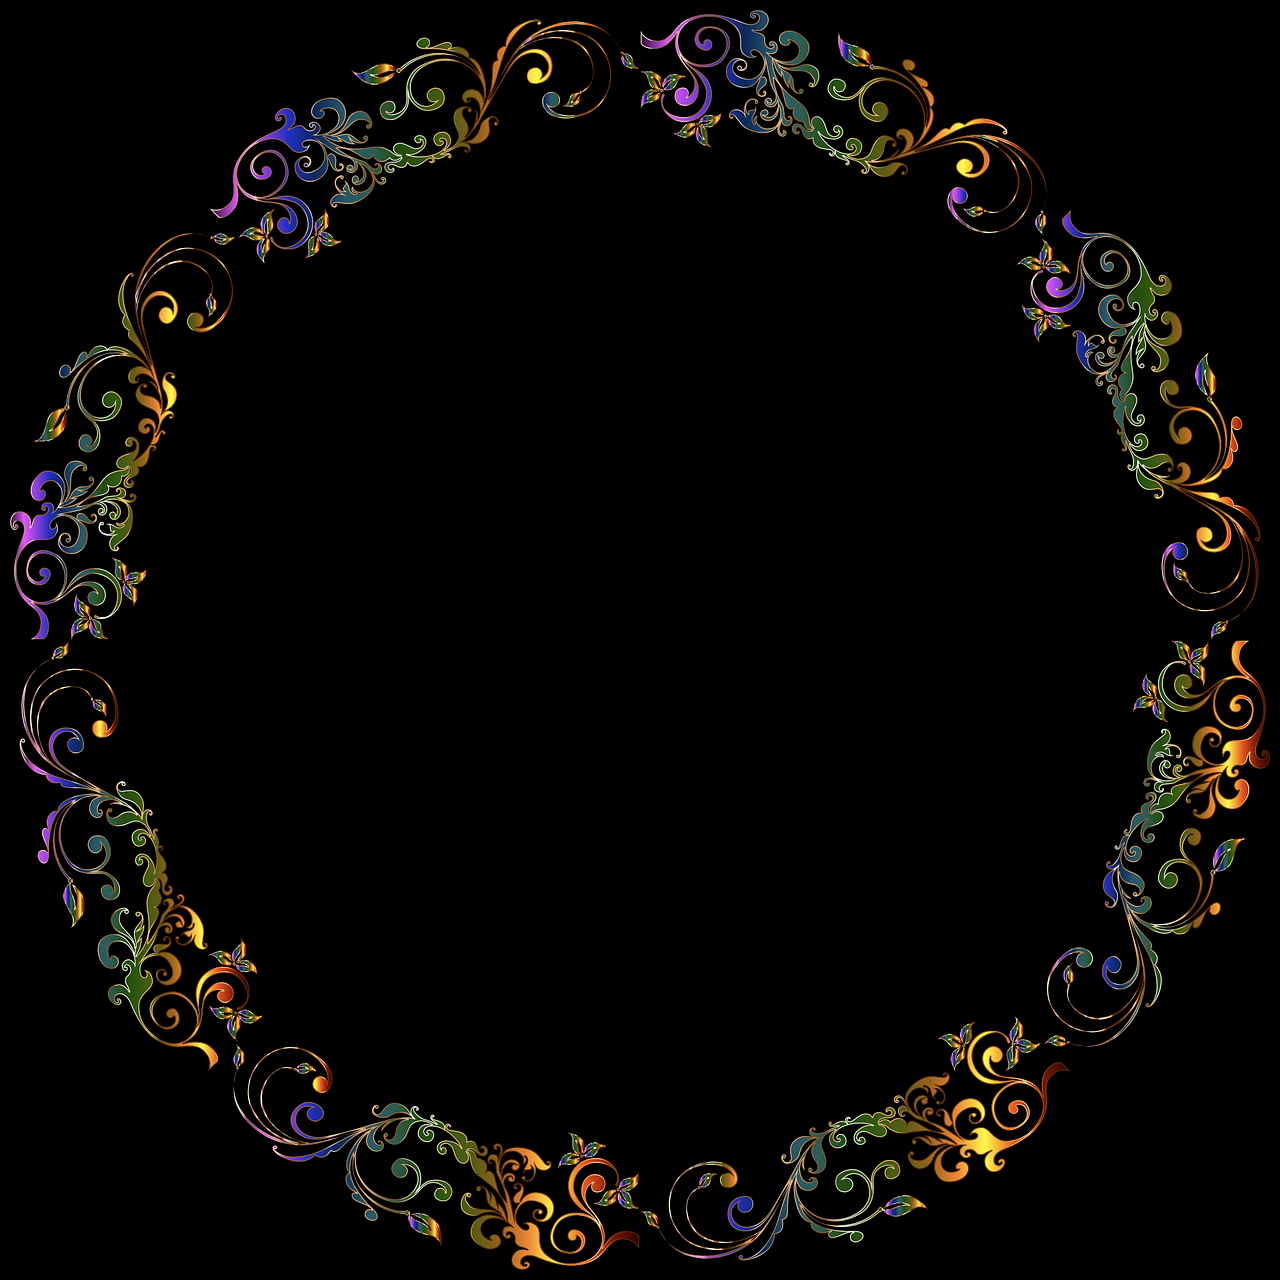 a circular floral frame on a black background, a digital rendering, baroque, gradient iridescence colors, filigree frame, jewelry iridescent, worms intricated